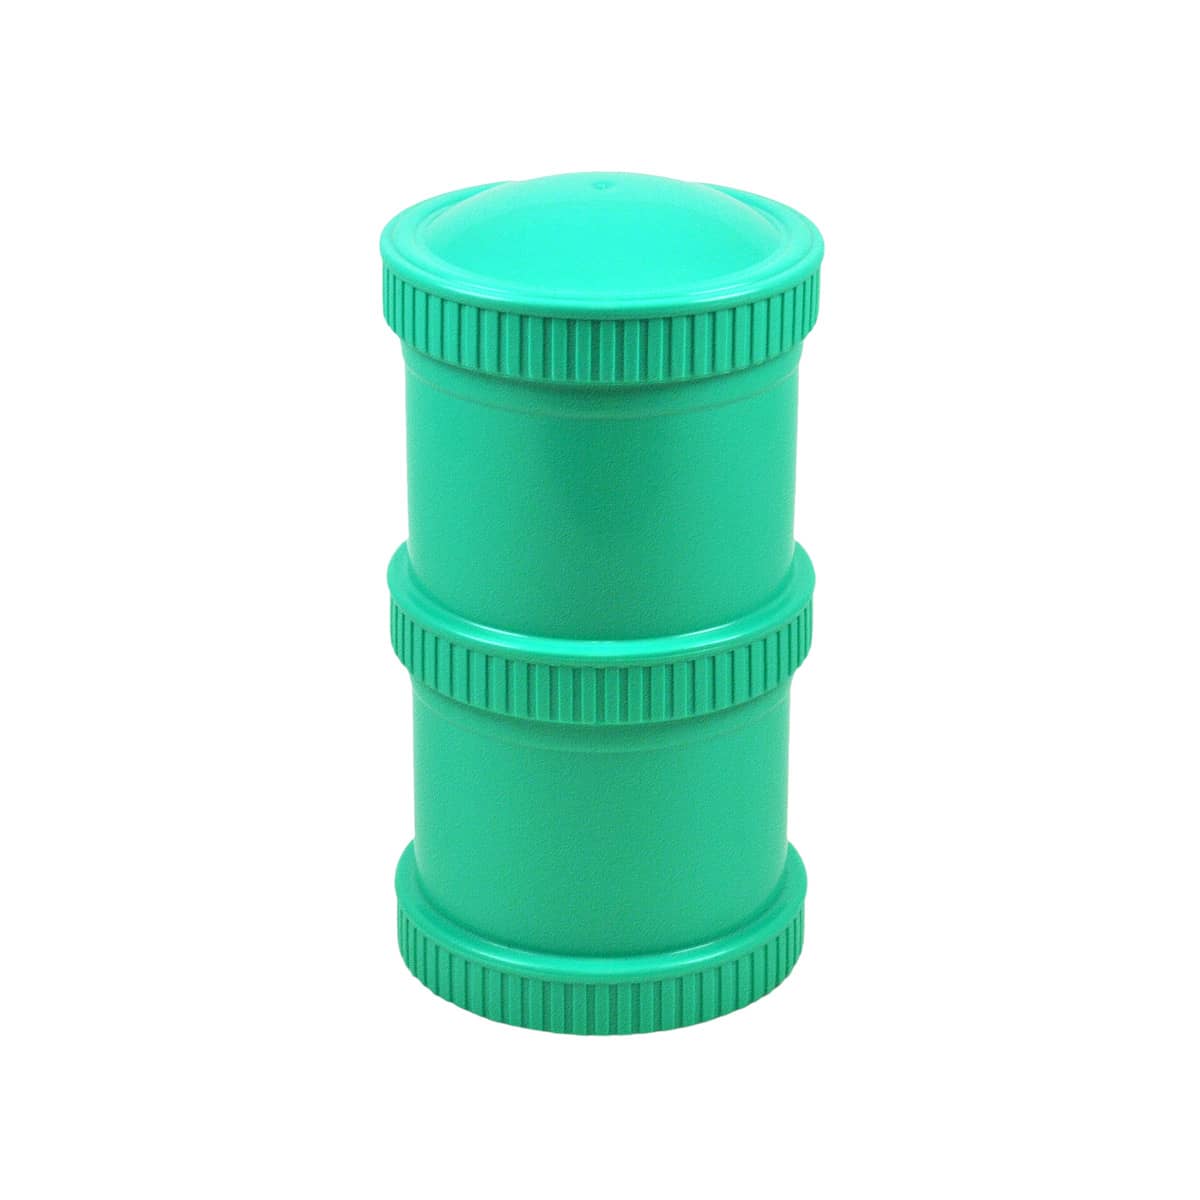 Re-Play Recycled Snack Stack - Aqua